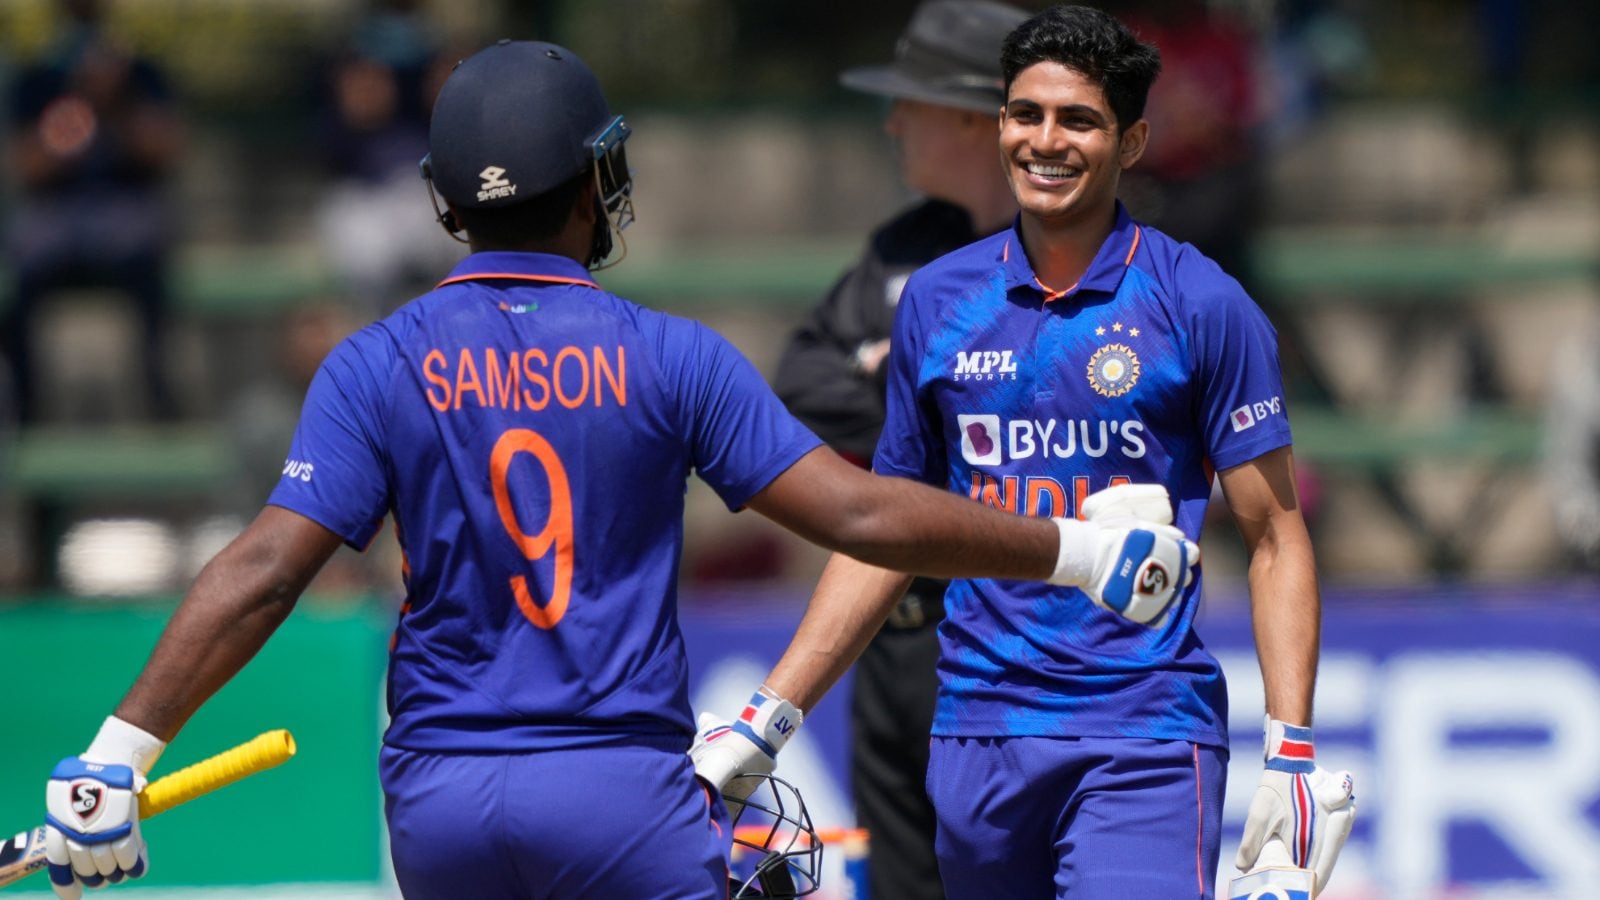 ind-vs-zim-3rd-odi-shubman-gill-s-maiden-ton-helps-india-post-289-8-against-zimbabwe